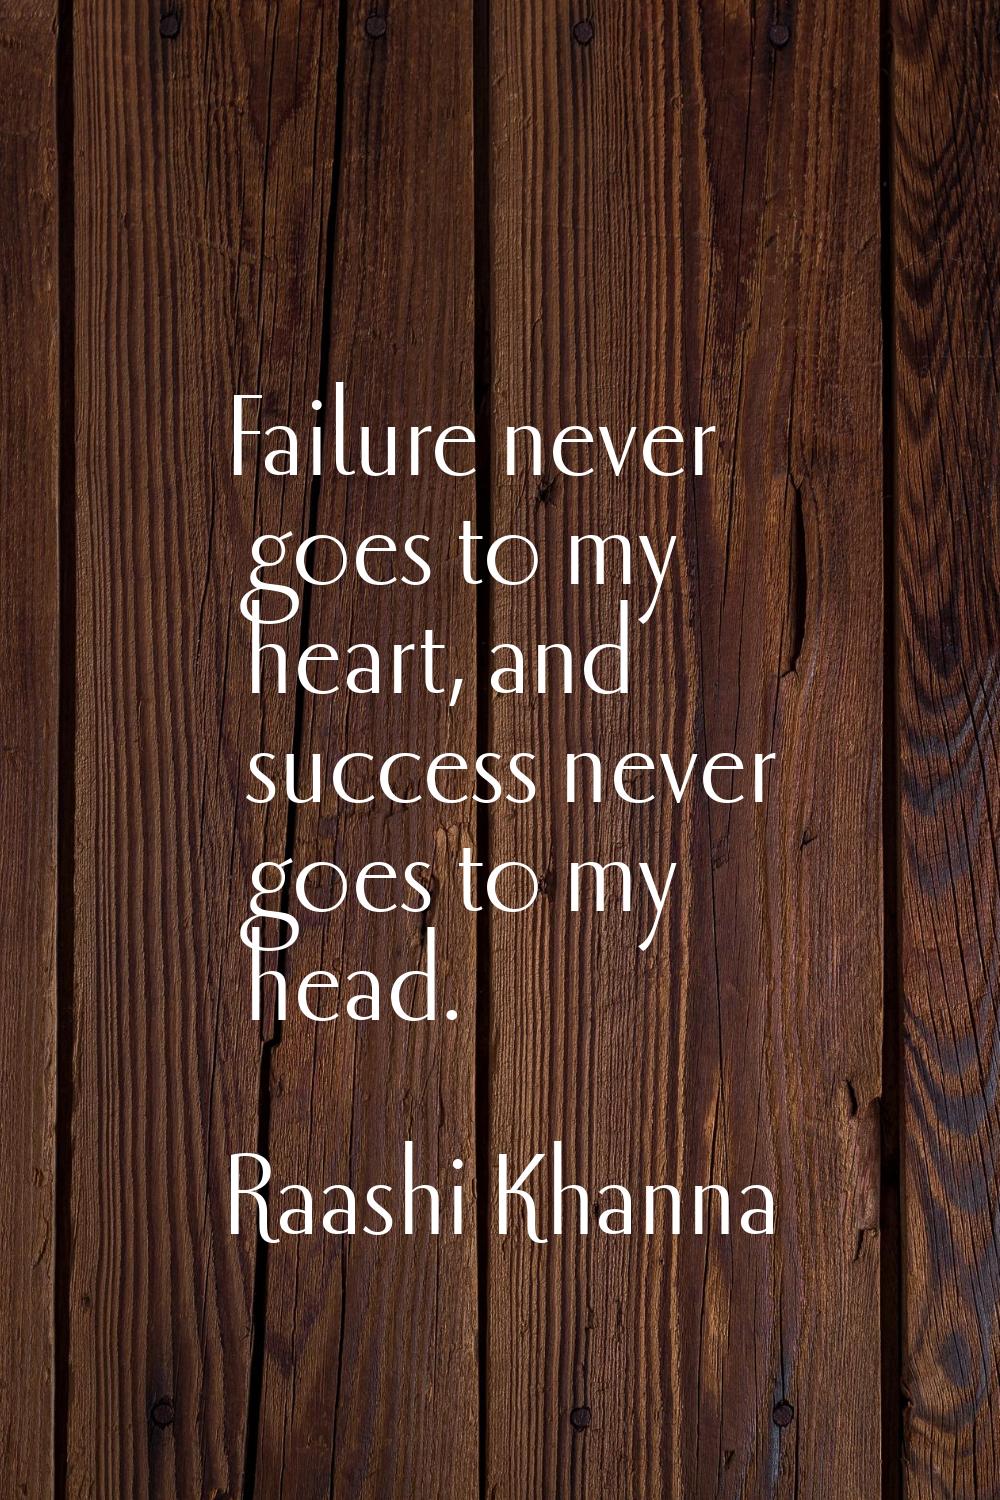 Failure never goes to my heart, and success never goes to my head.